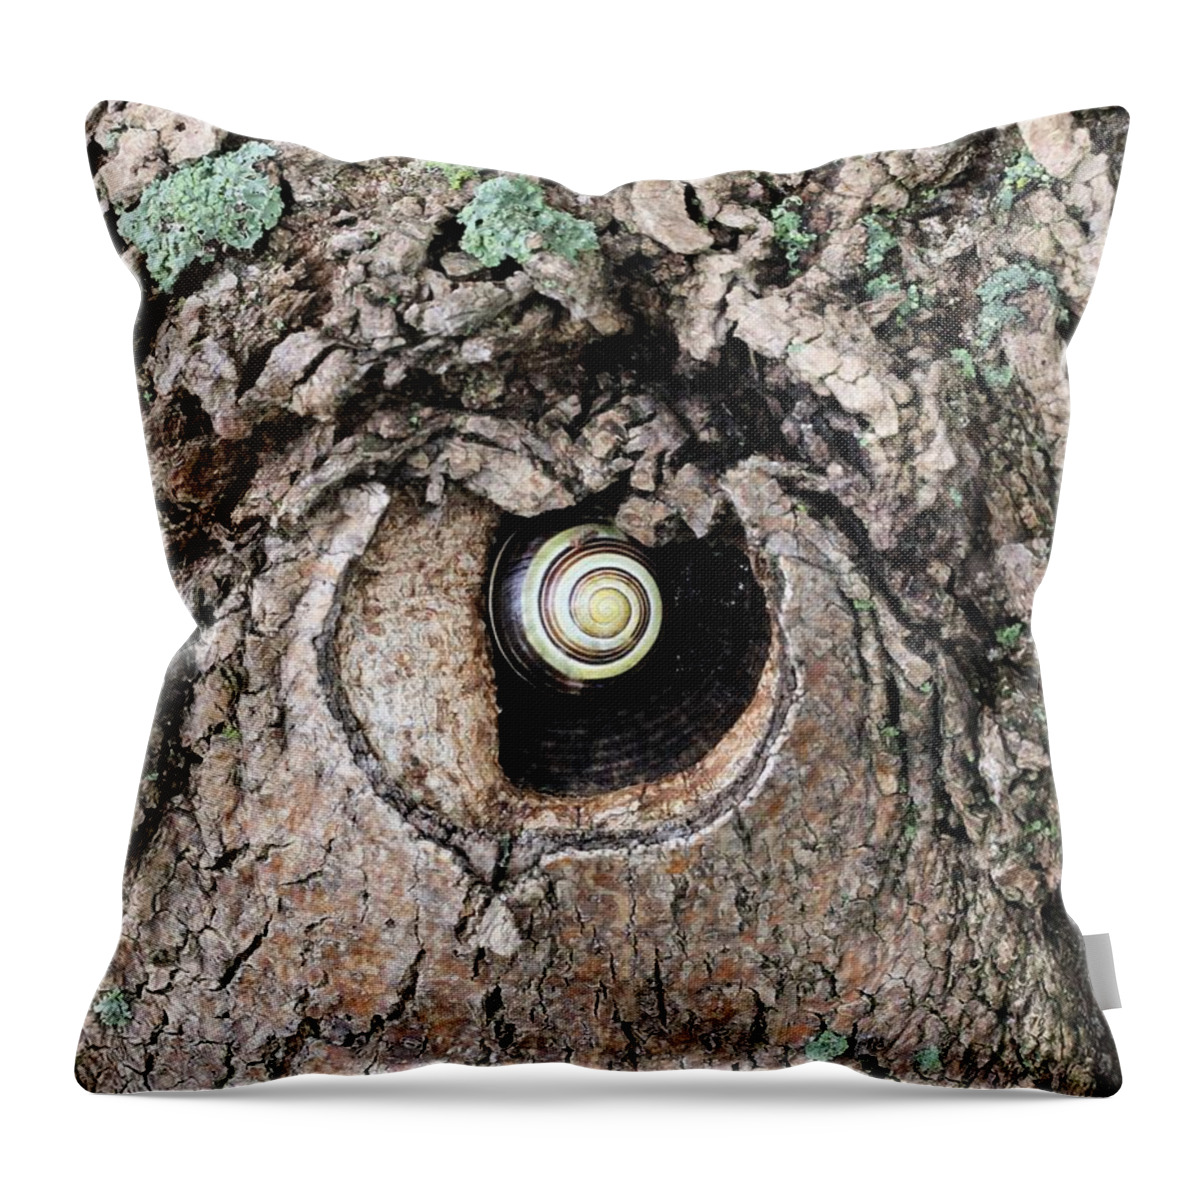 Snail Throw Pillow featuring the photograph The Forest Is Watching by Doris Potter